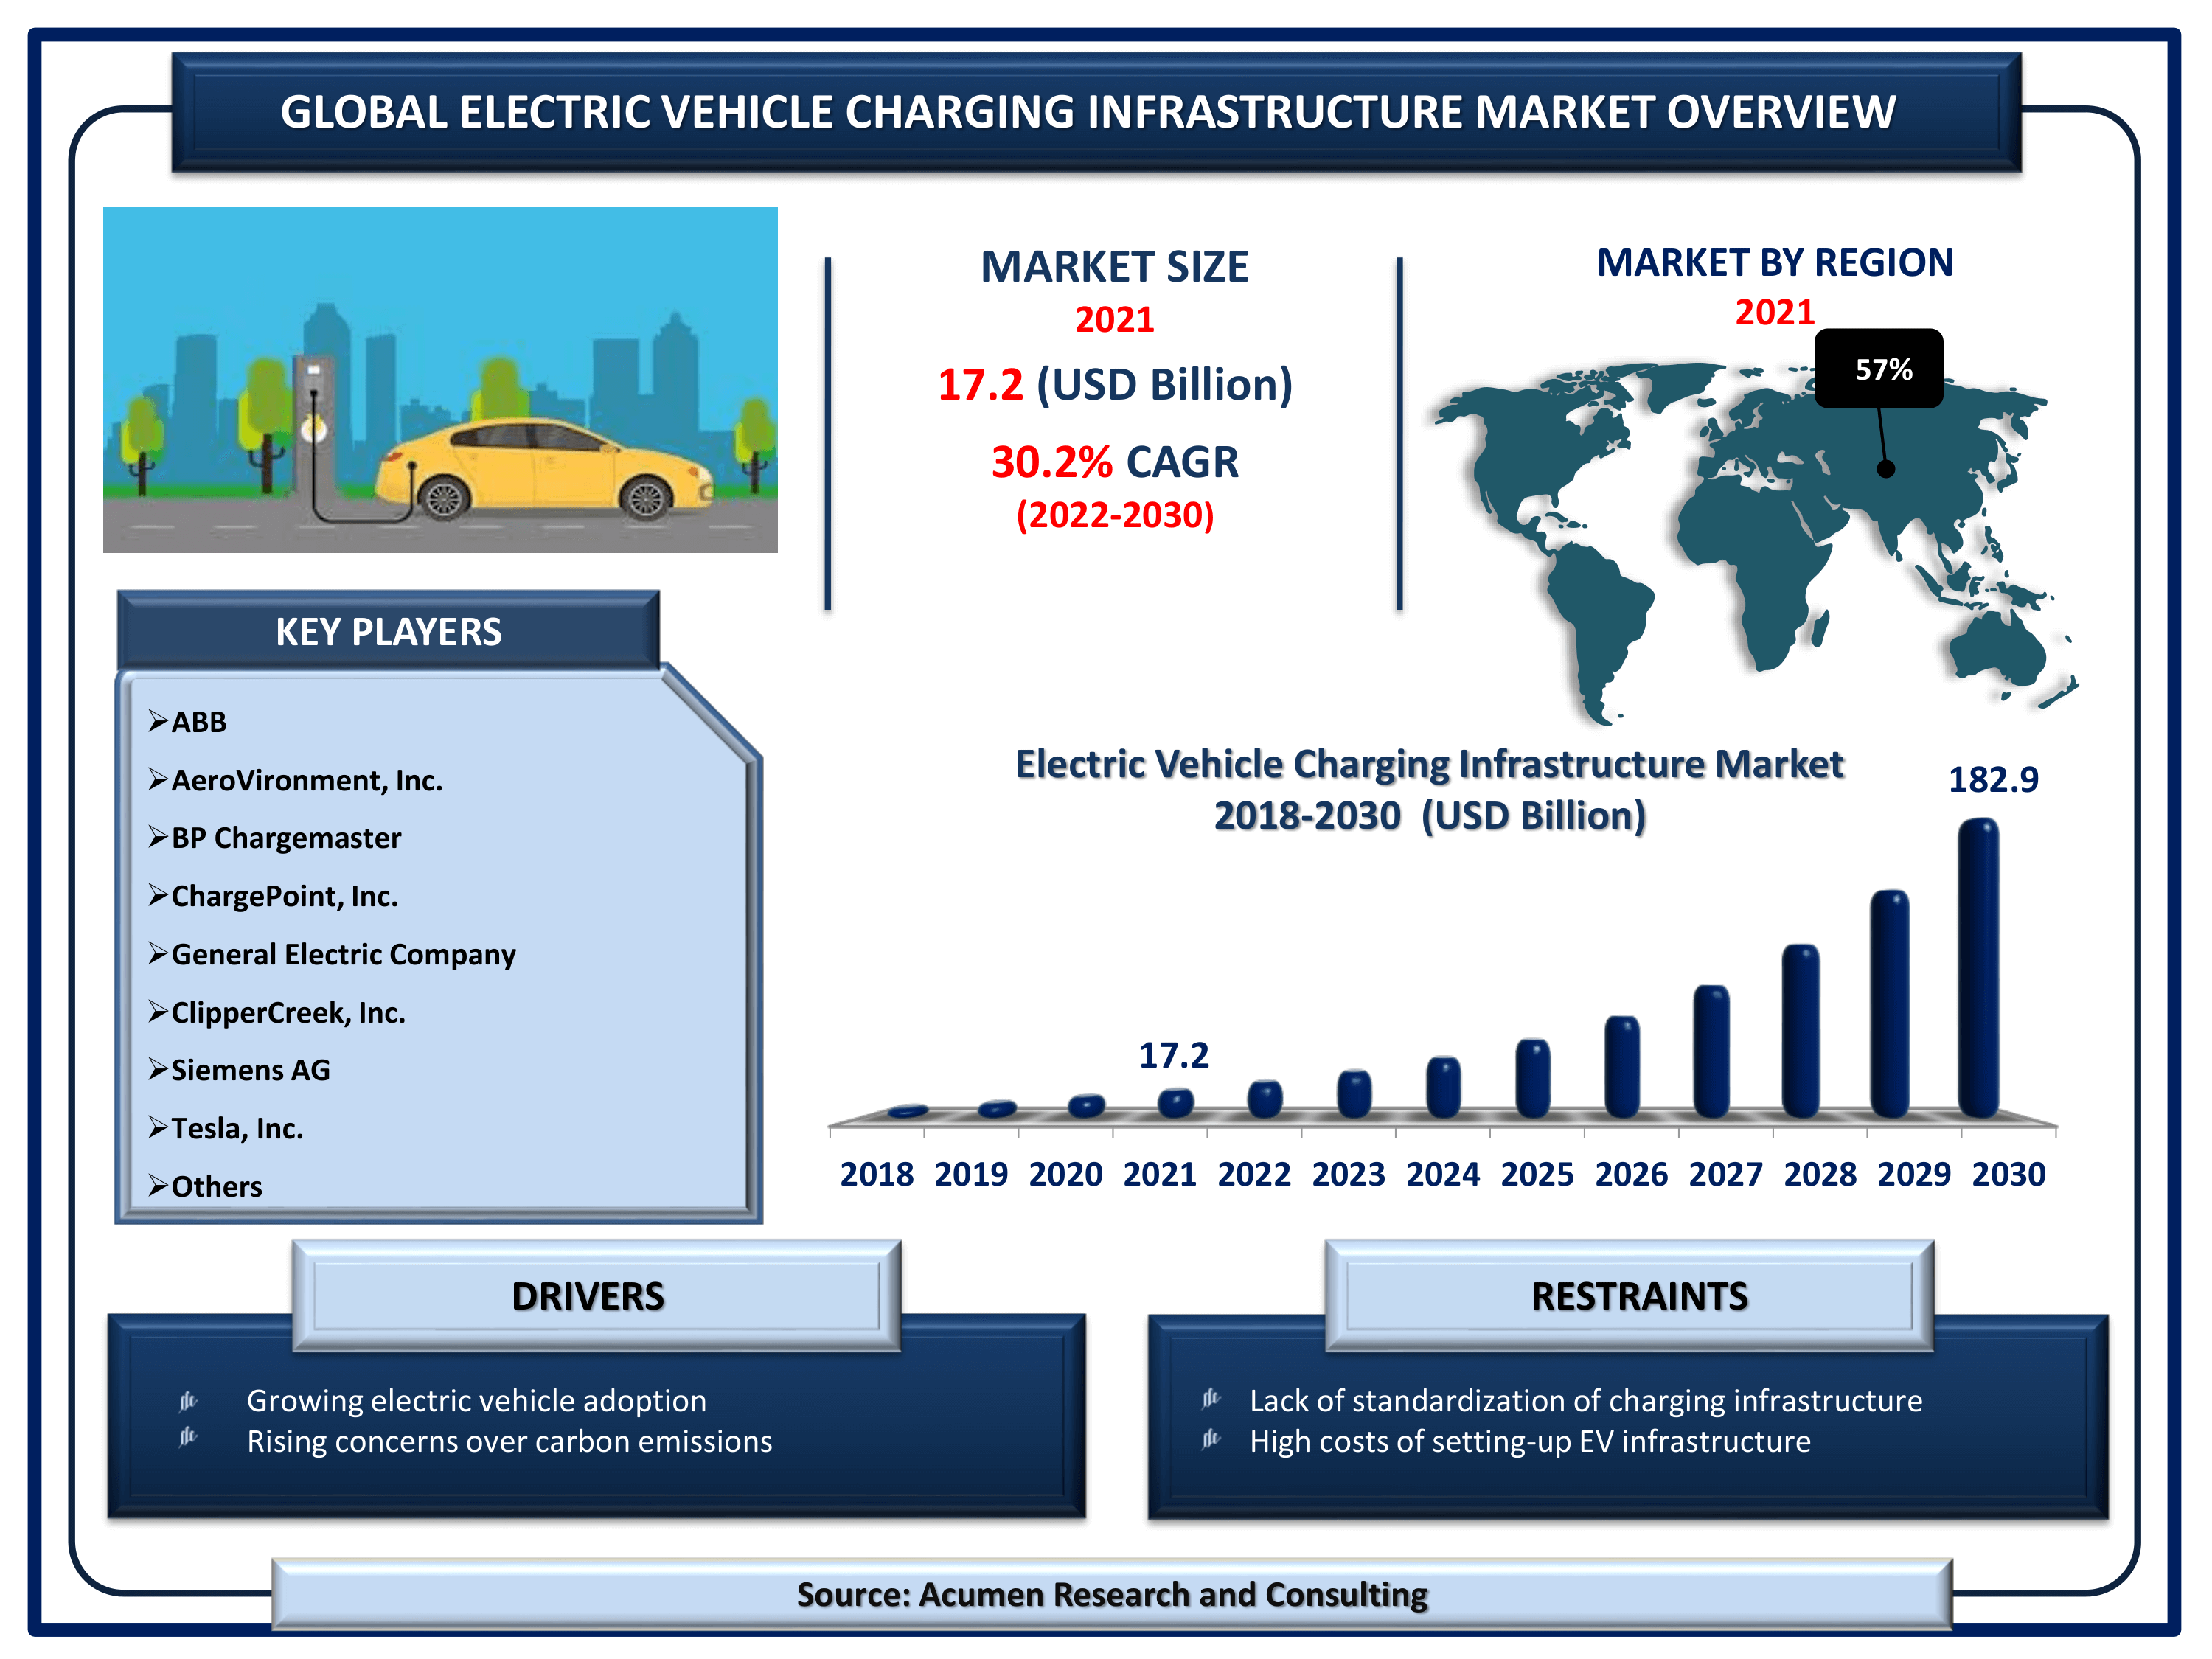 Global electric vehicle charging infrastructure market revenue is estimated to reach USD 182.9 Billion by 2030 with a CAGR of 30.2% from 2022 to 2030